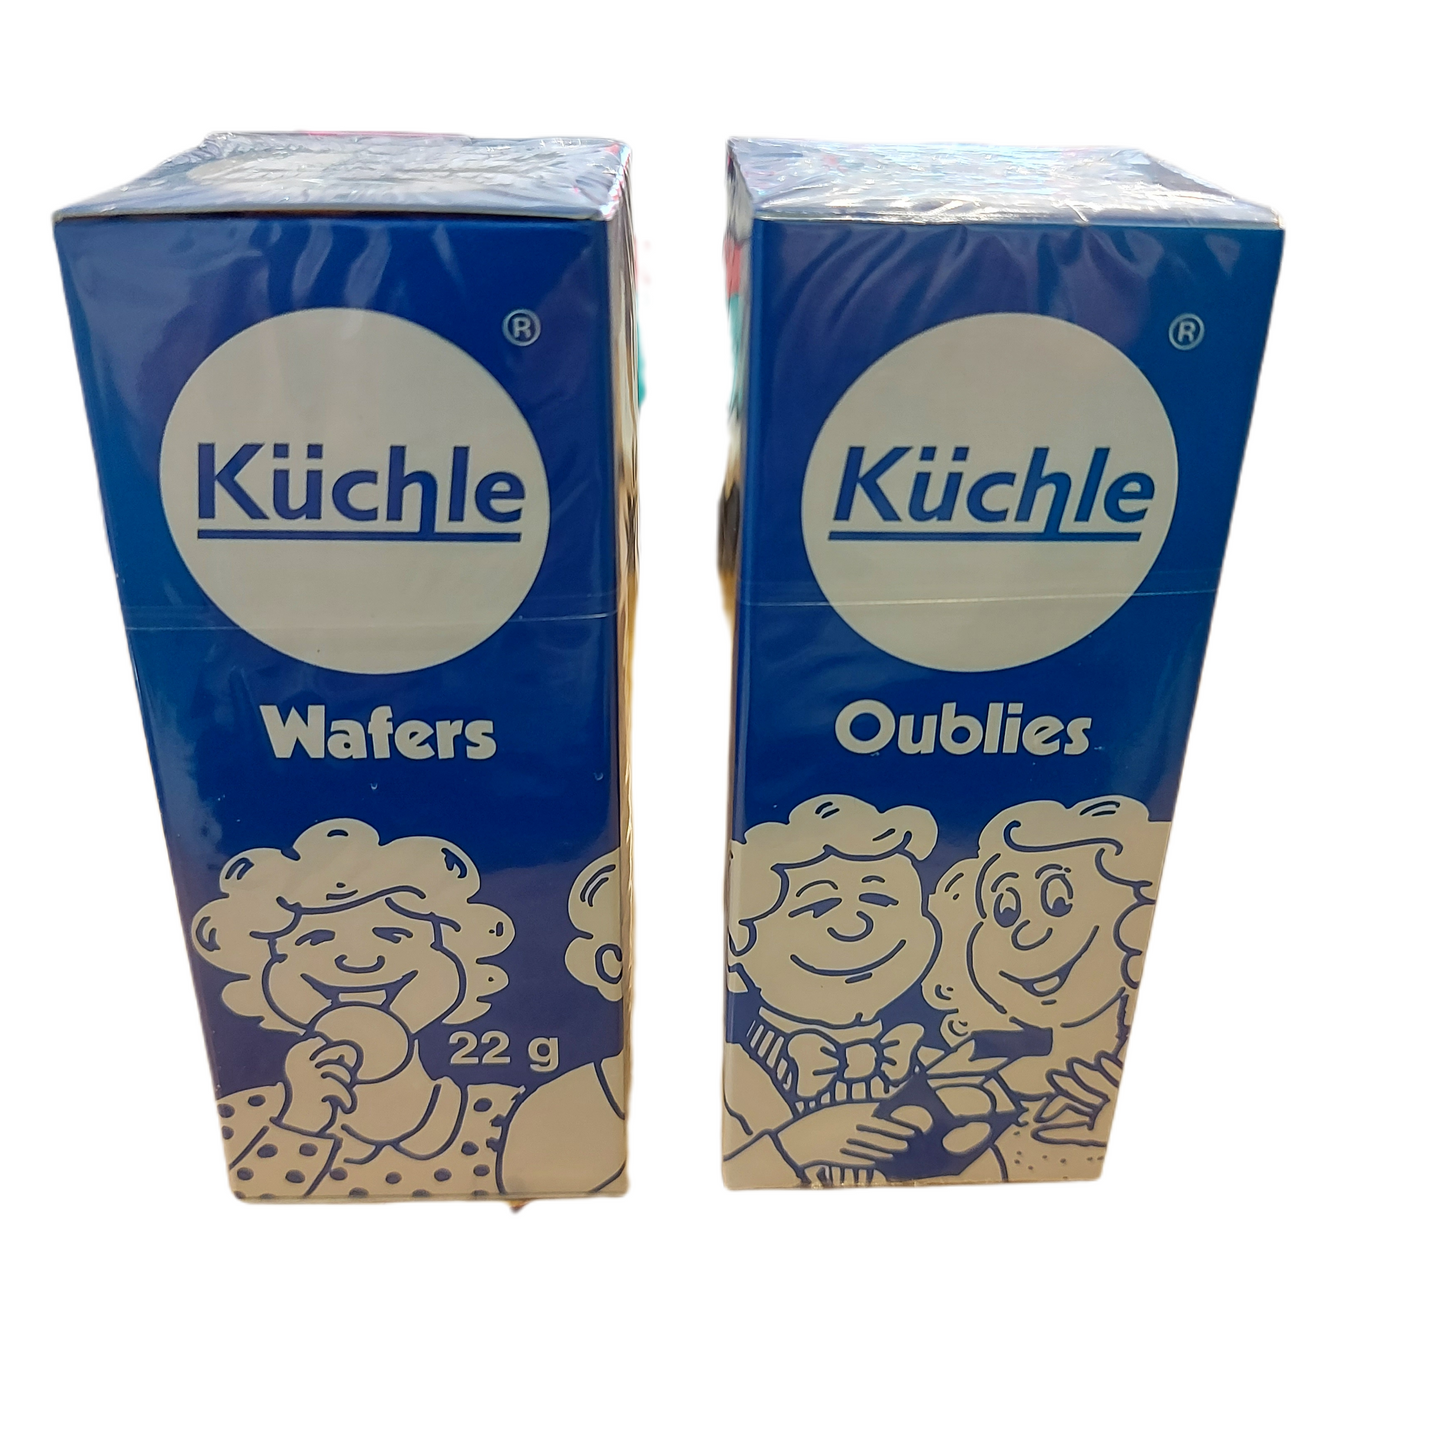 Kuchle Wafers Oublies